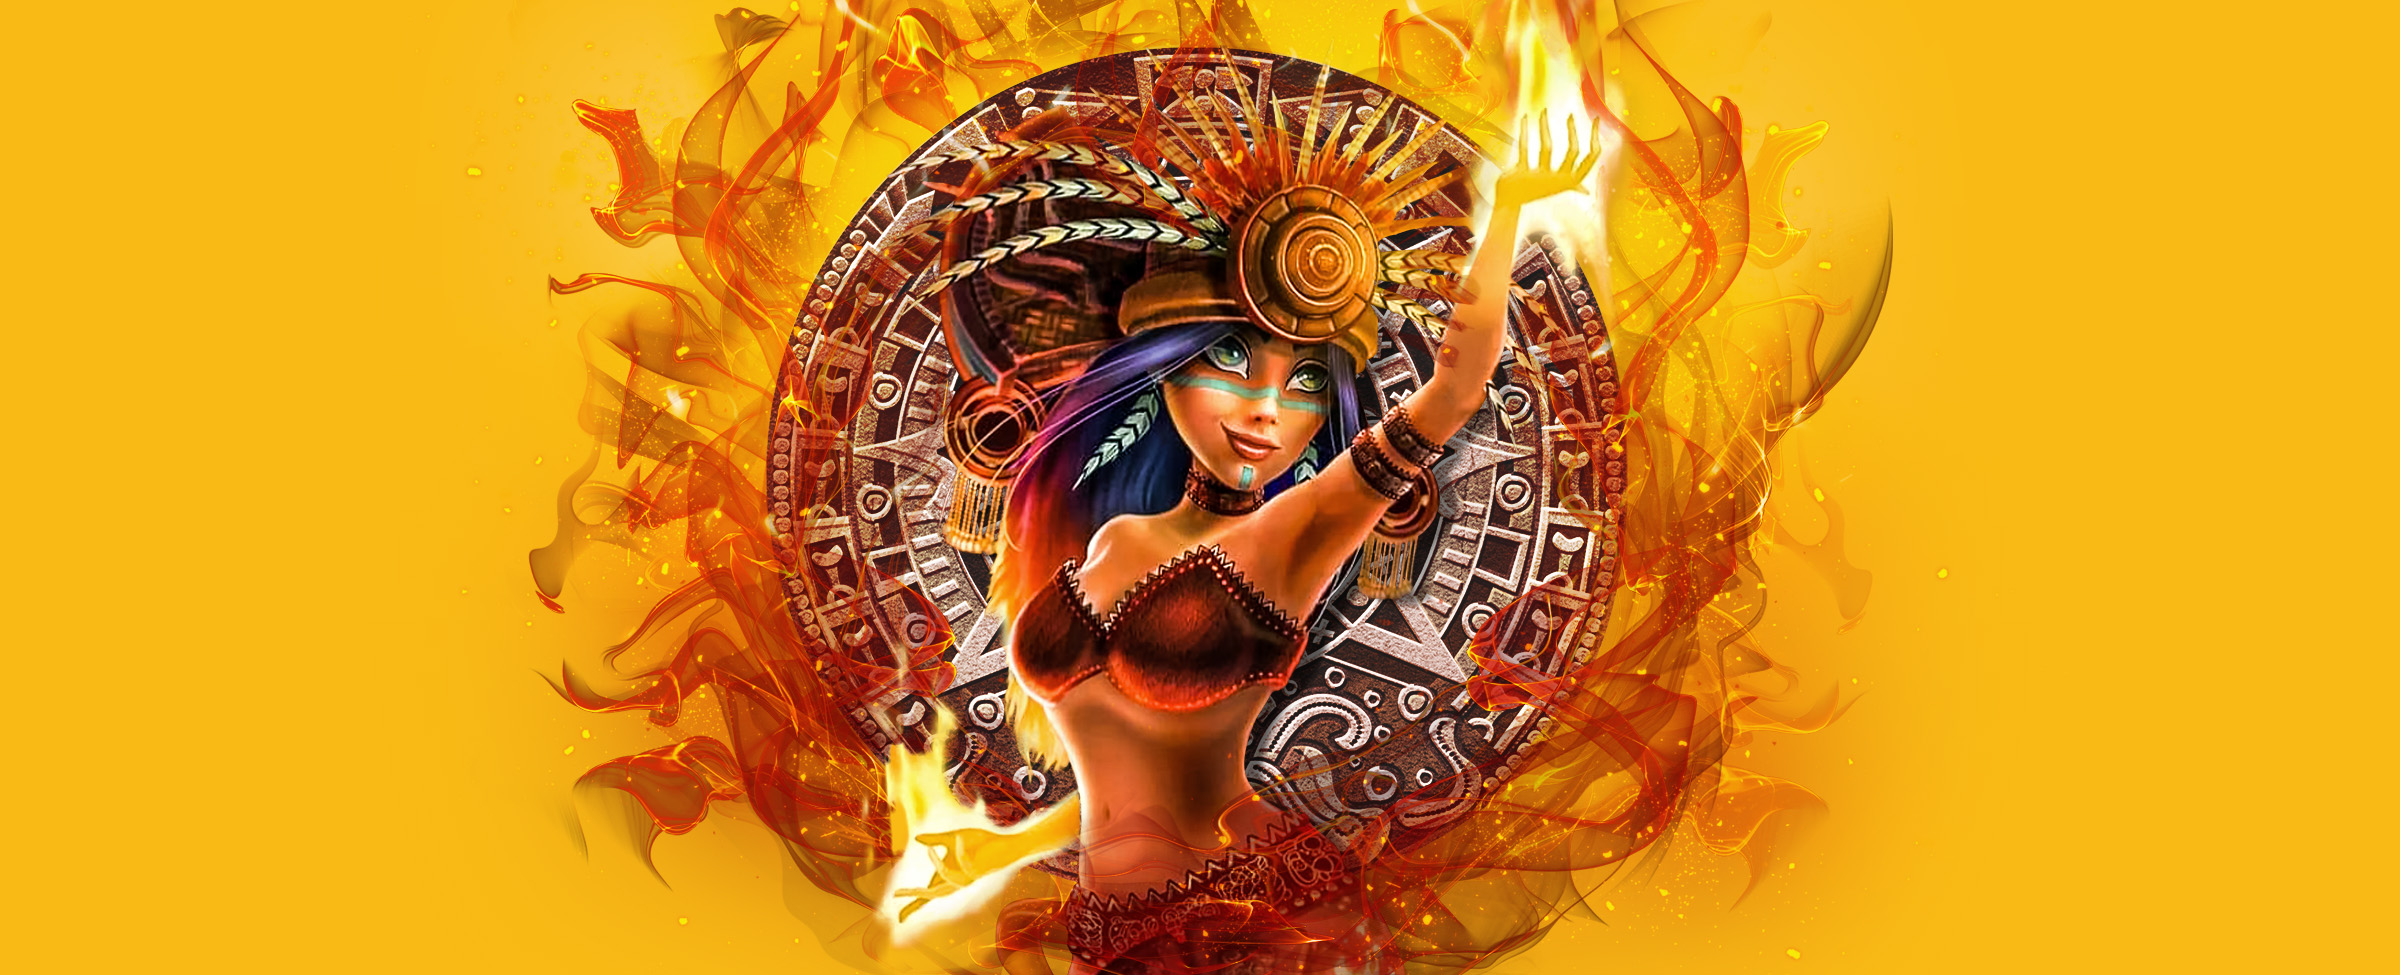 Explore the caves of the Aztecs in Solfire - an epic adventure waiting for you. Are you game?